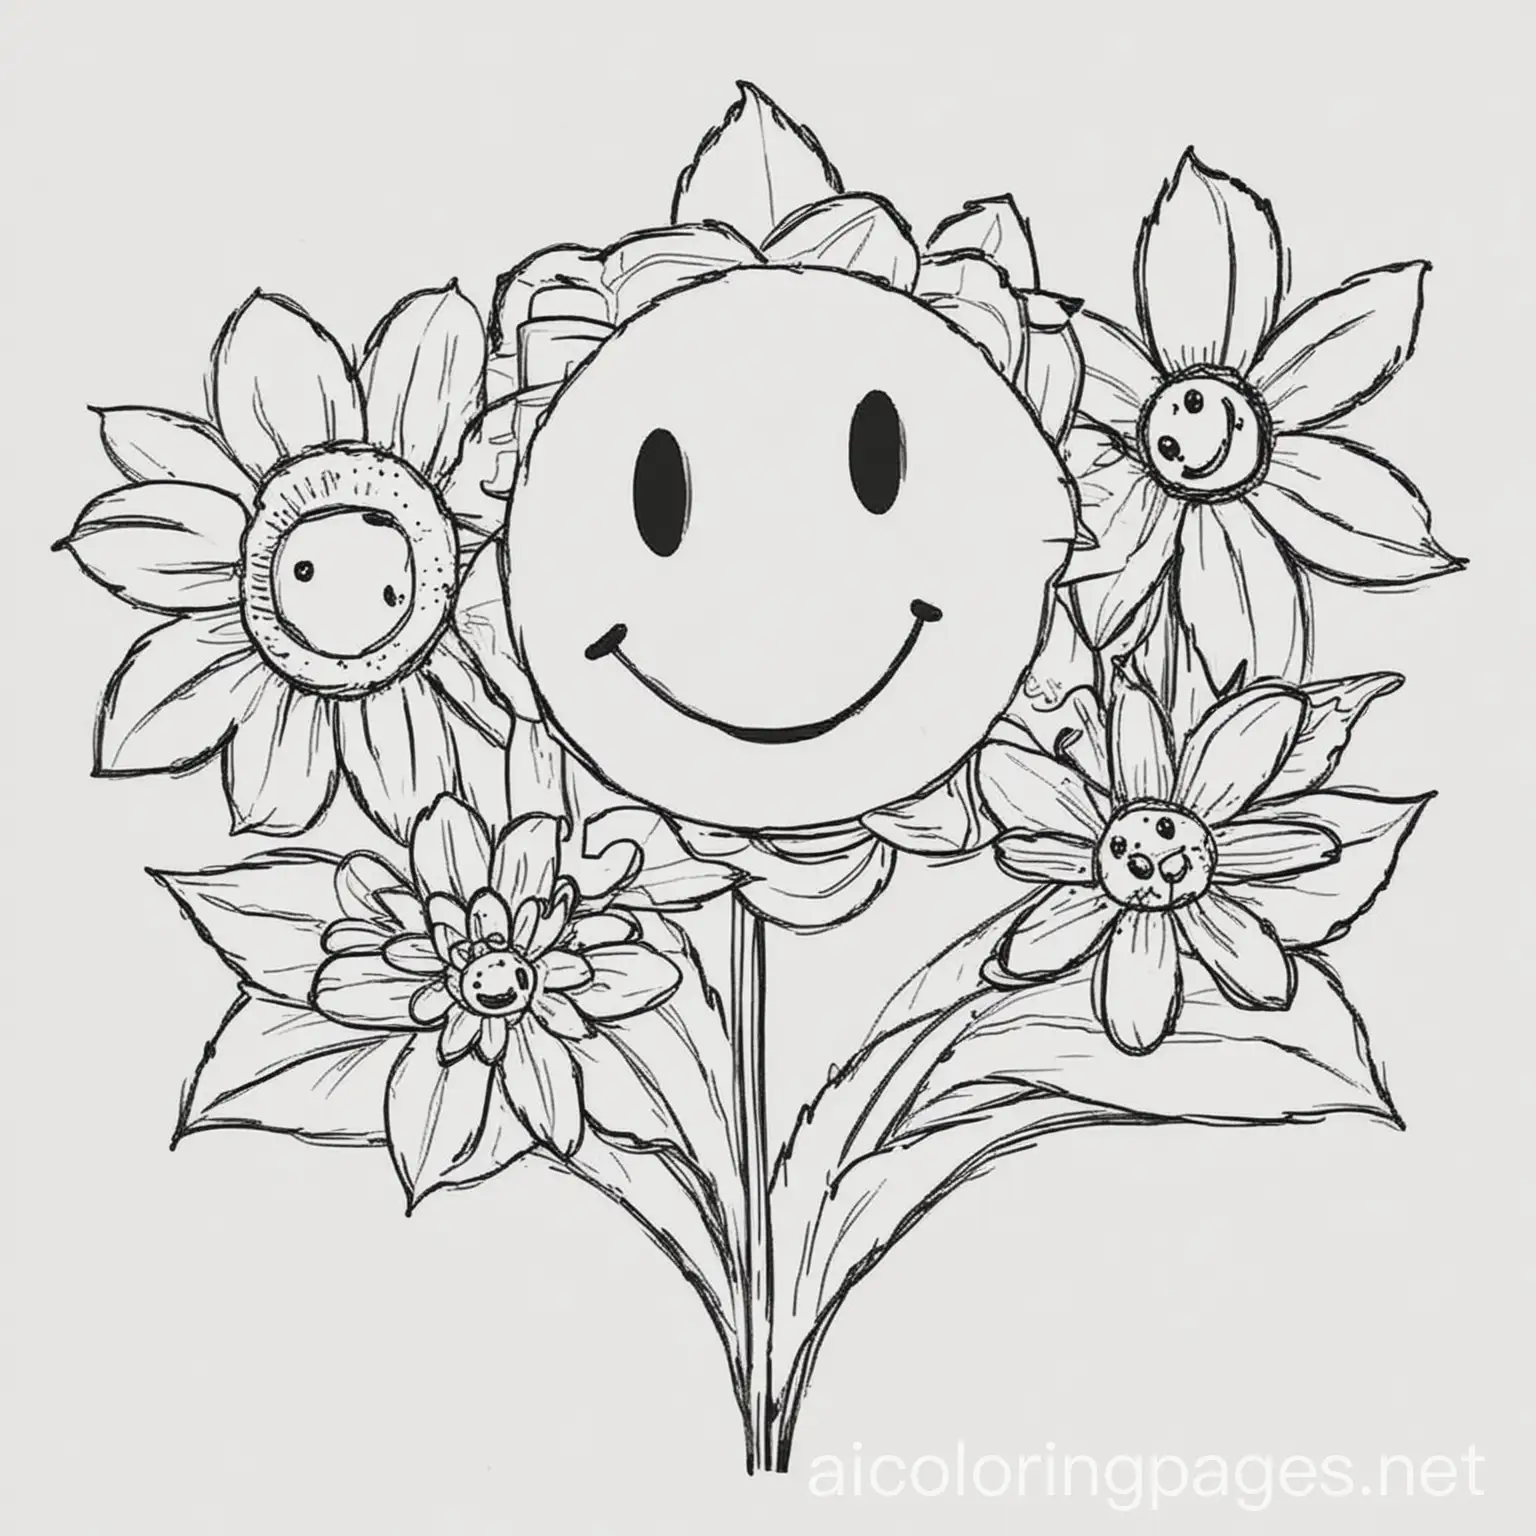 cartoon flowers with smiley faces, Coloring Page, black and white, line art, white background, Simplicity, Ample White Space. The background of the coloring page is plain white to make it easy for young children to color within the lines. The outlines of all the subjects are easy to distinguish, making it simple for kids to color without too much difficulty, Coloring Page, black and white, line art, white background, Simplicity, Ample White Space. The background of the coloring page is plain white to make it easy for young children to color within the lines. The outlines of all the subjects are easy to distinguish, making it simple for kids to color without too much difficulty